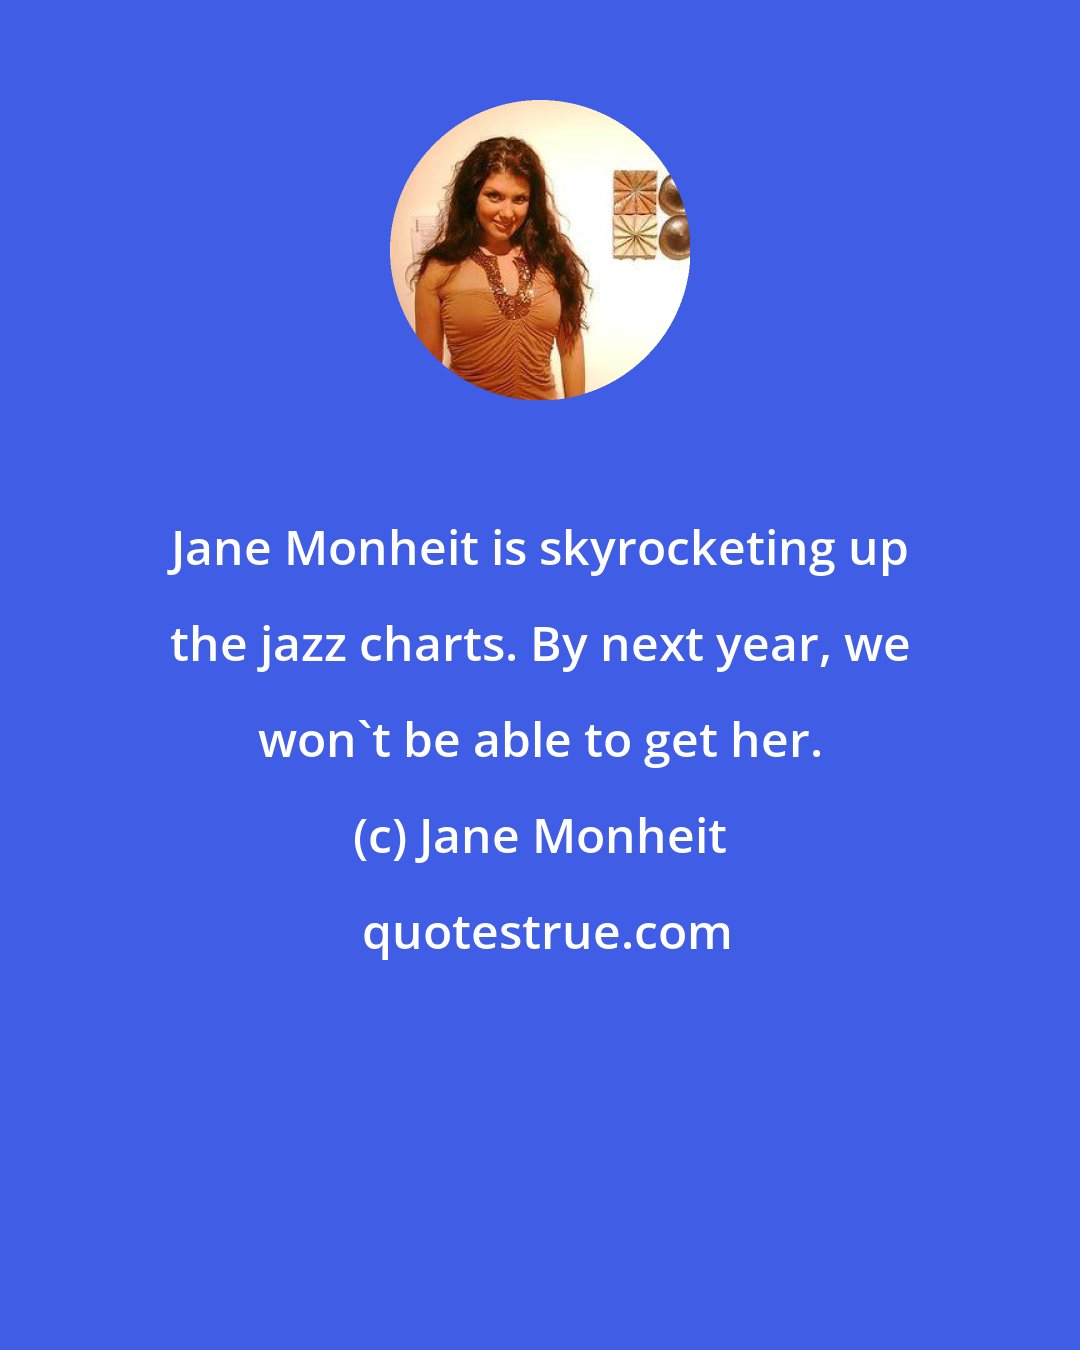 Jane Monheit: Jane Monheit is skyrocketing up the jazz charts. By next year, we won't be able to get her.